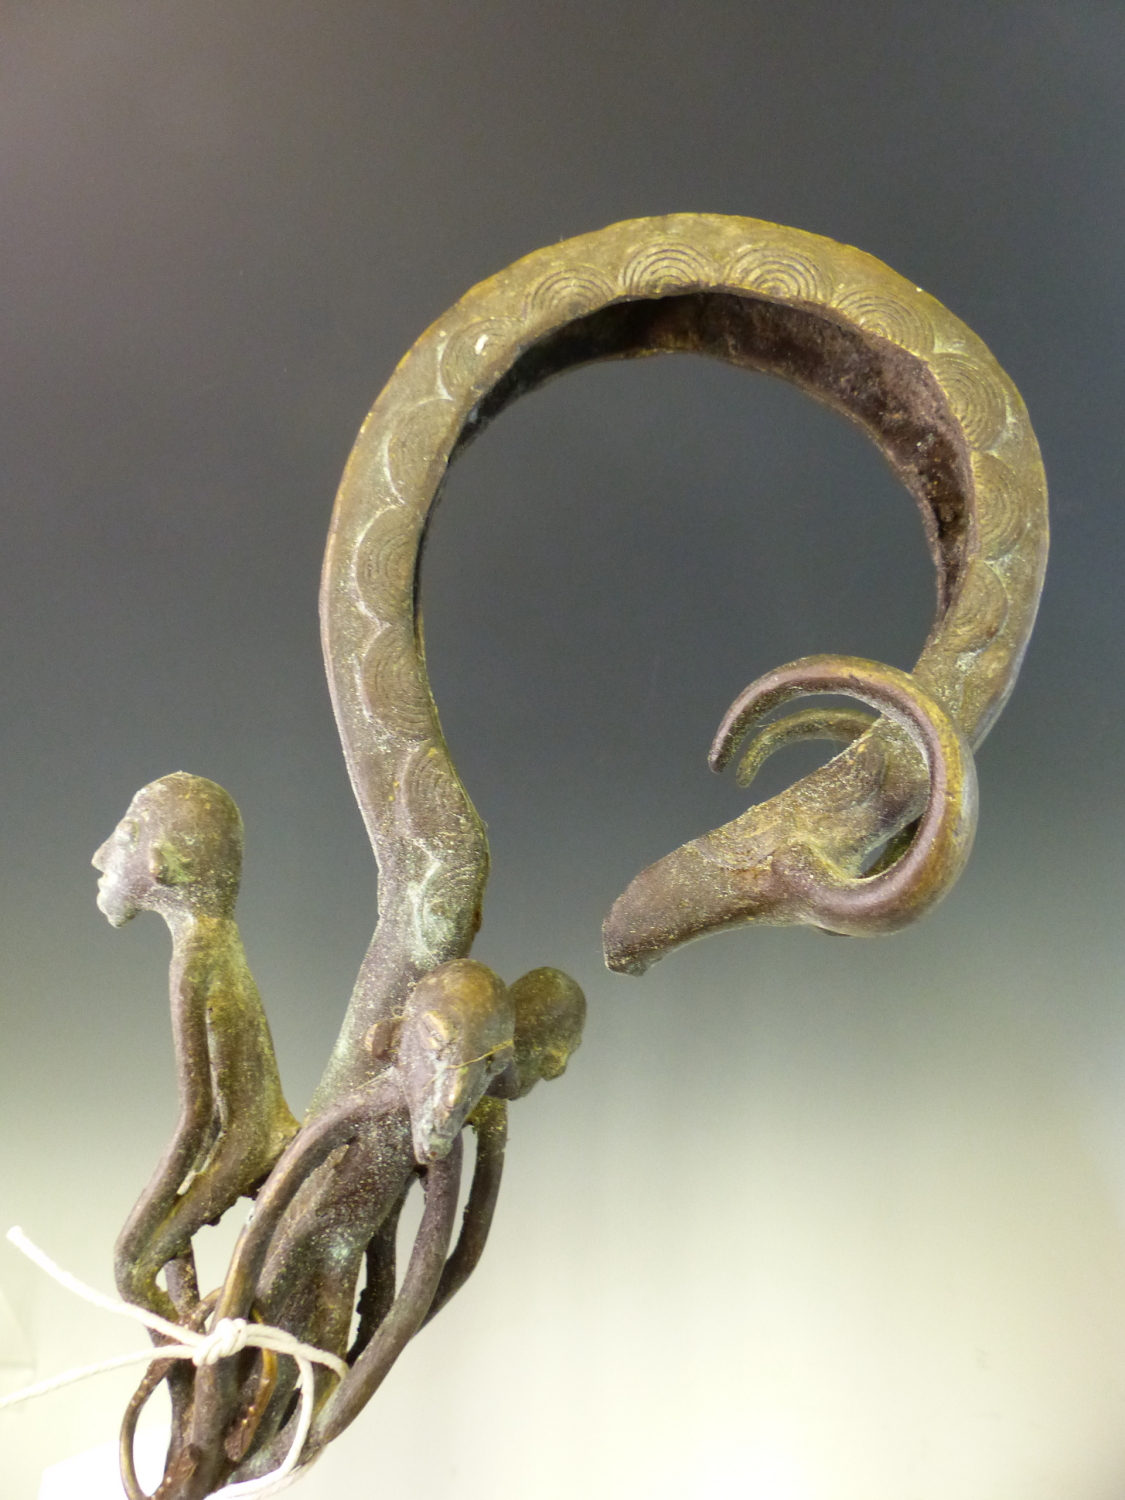 A 20th C. ASANTE BRONZE STAFF OF OFFICE, THE HOOKED HANDLE ENDING IN THE HEAD OF A GAZELLE ABOVE